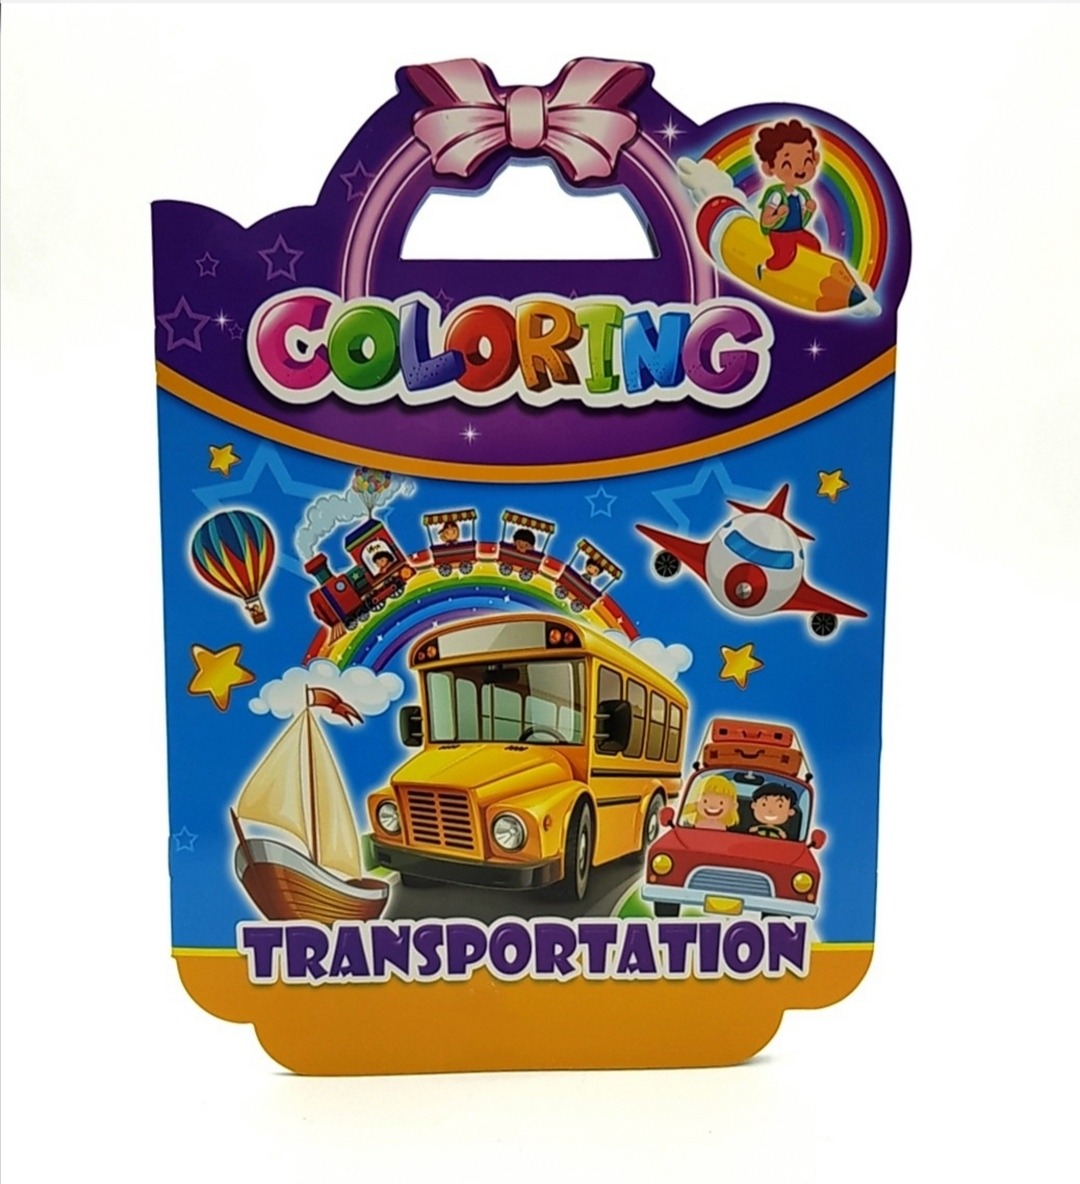 Vehicle Coloring Book: Things That Go Transportation Coloring Book for Kids with Cars, Trucks, Helicopters, Motorcycles, Tractors, Planes, and Trains (Coloring Books for Boys and Girls)